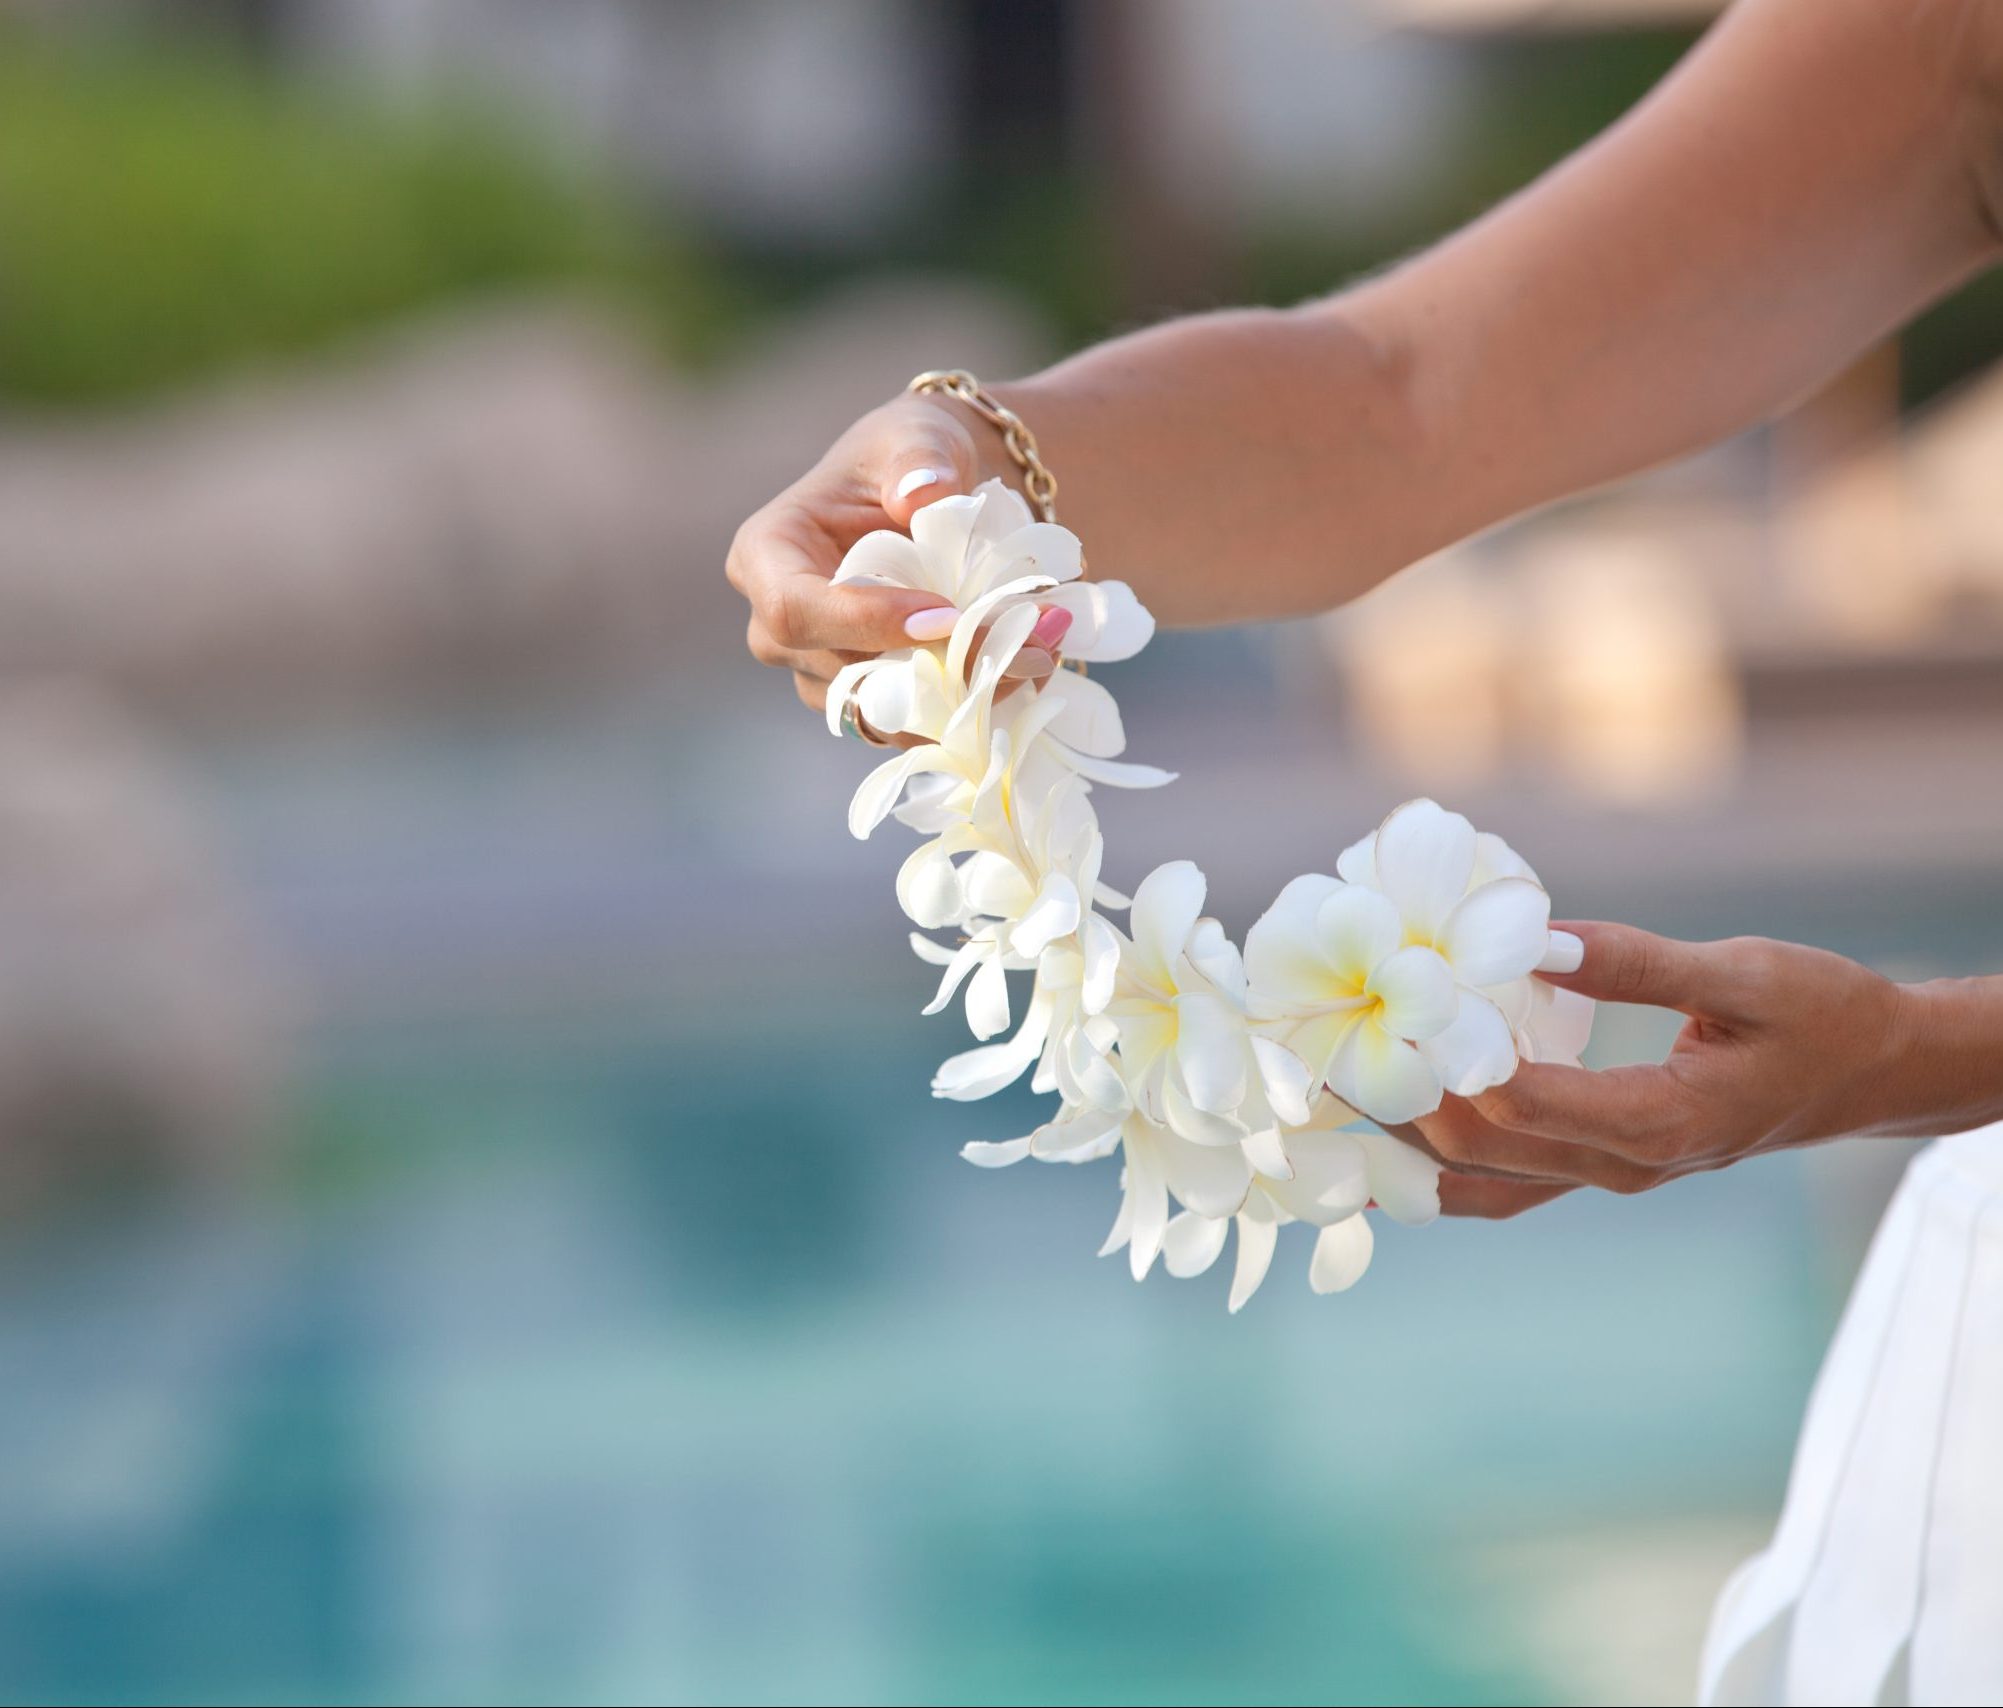 Woman hands holding flower lei garland of white plumeria, in a motion of welcome.